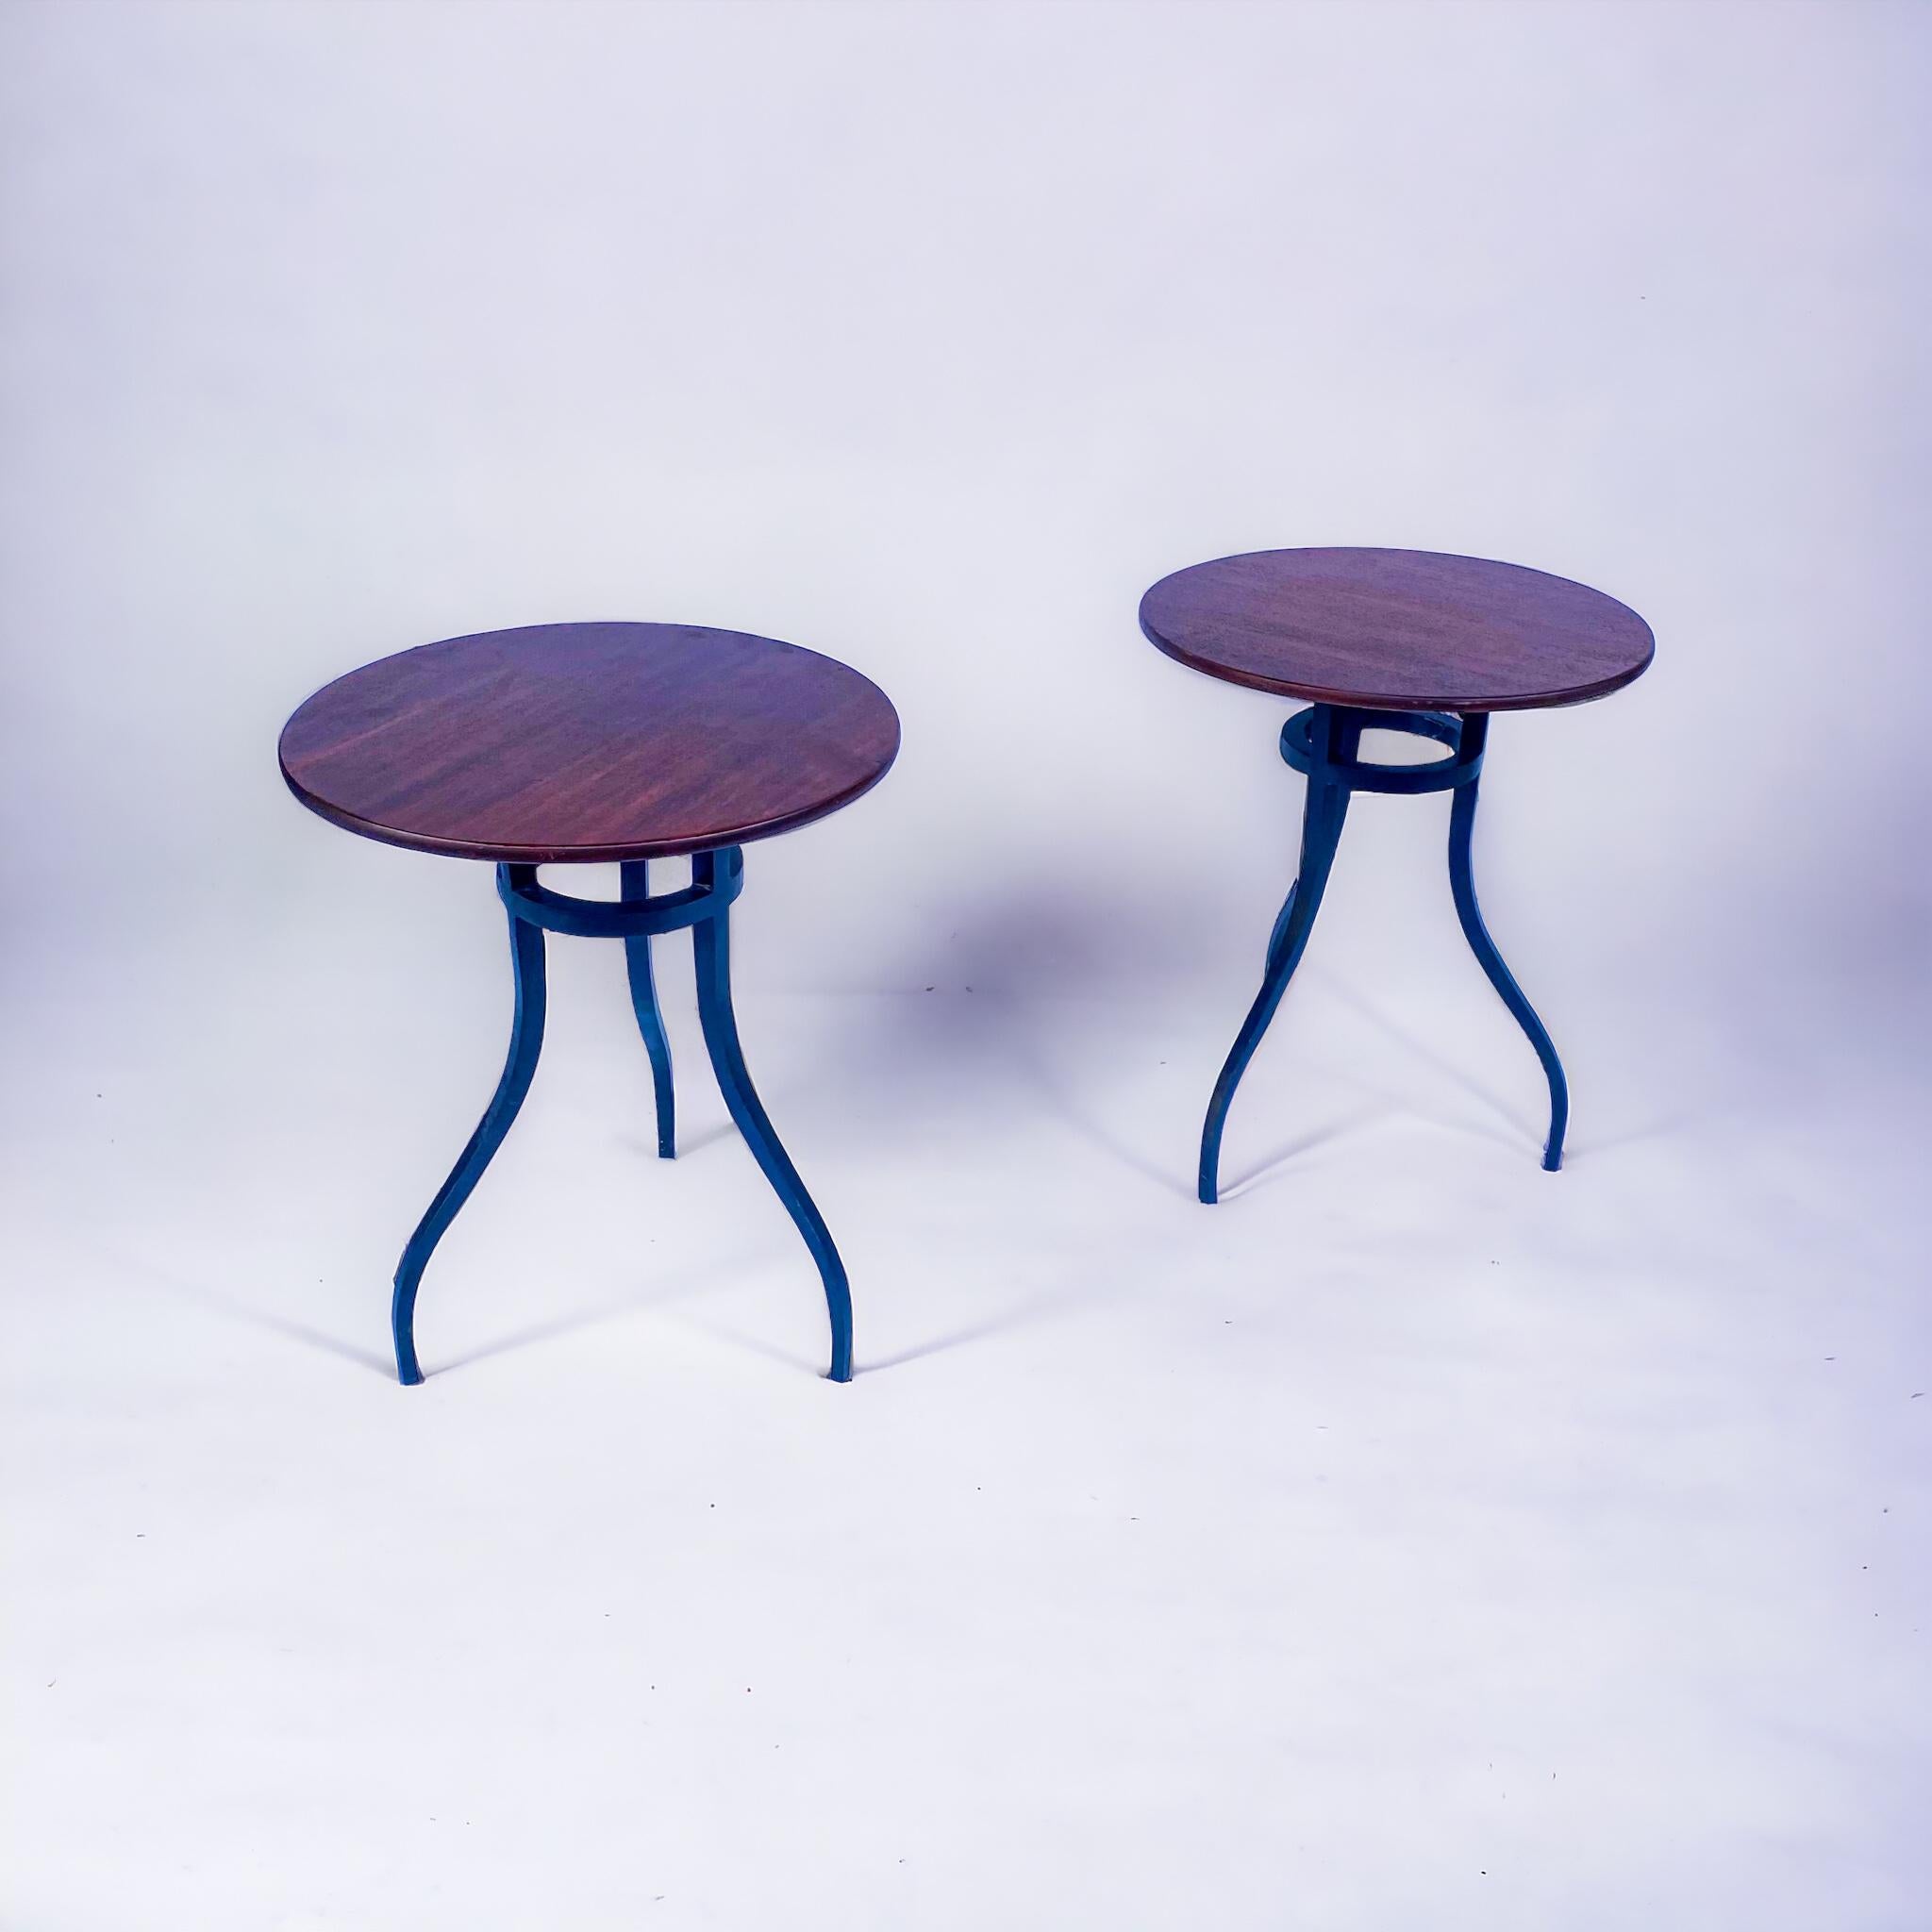 20th Century Baker Milling Road British Colonial Style Mahogany & Wrought Iron Side Tables -2 For Sale